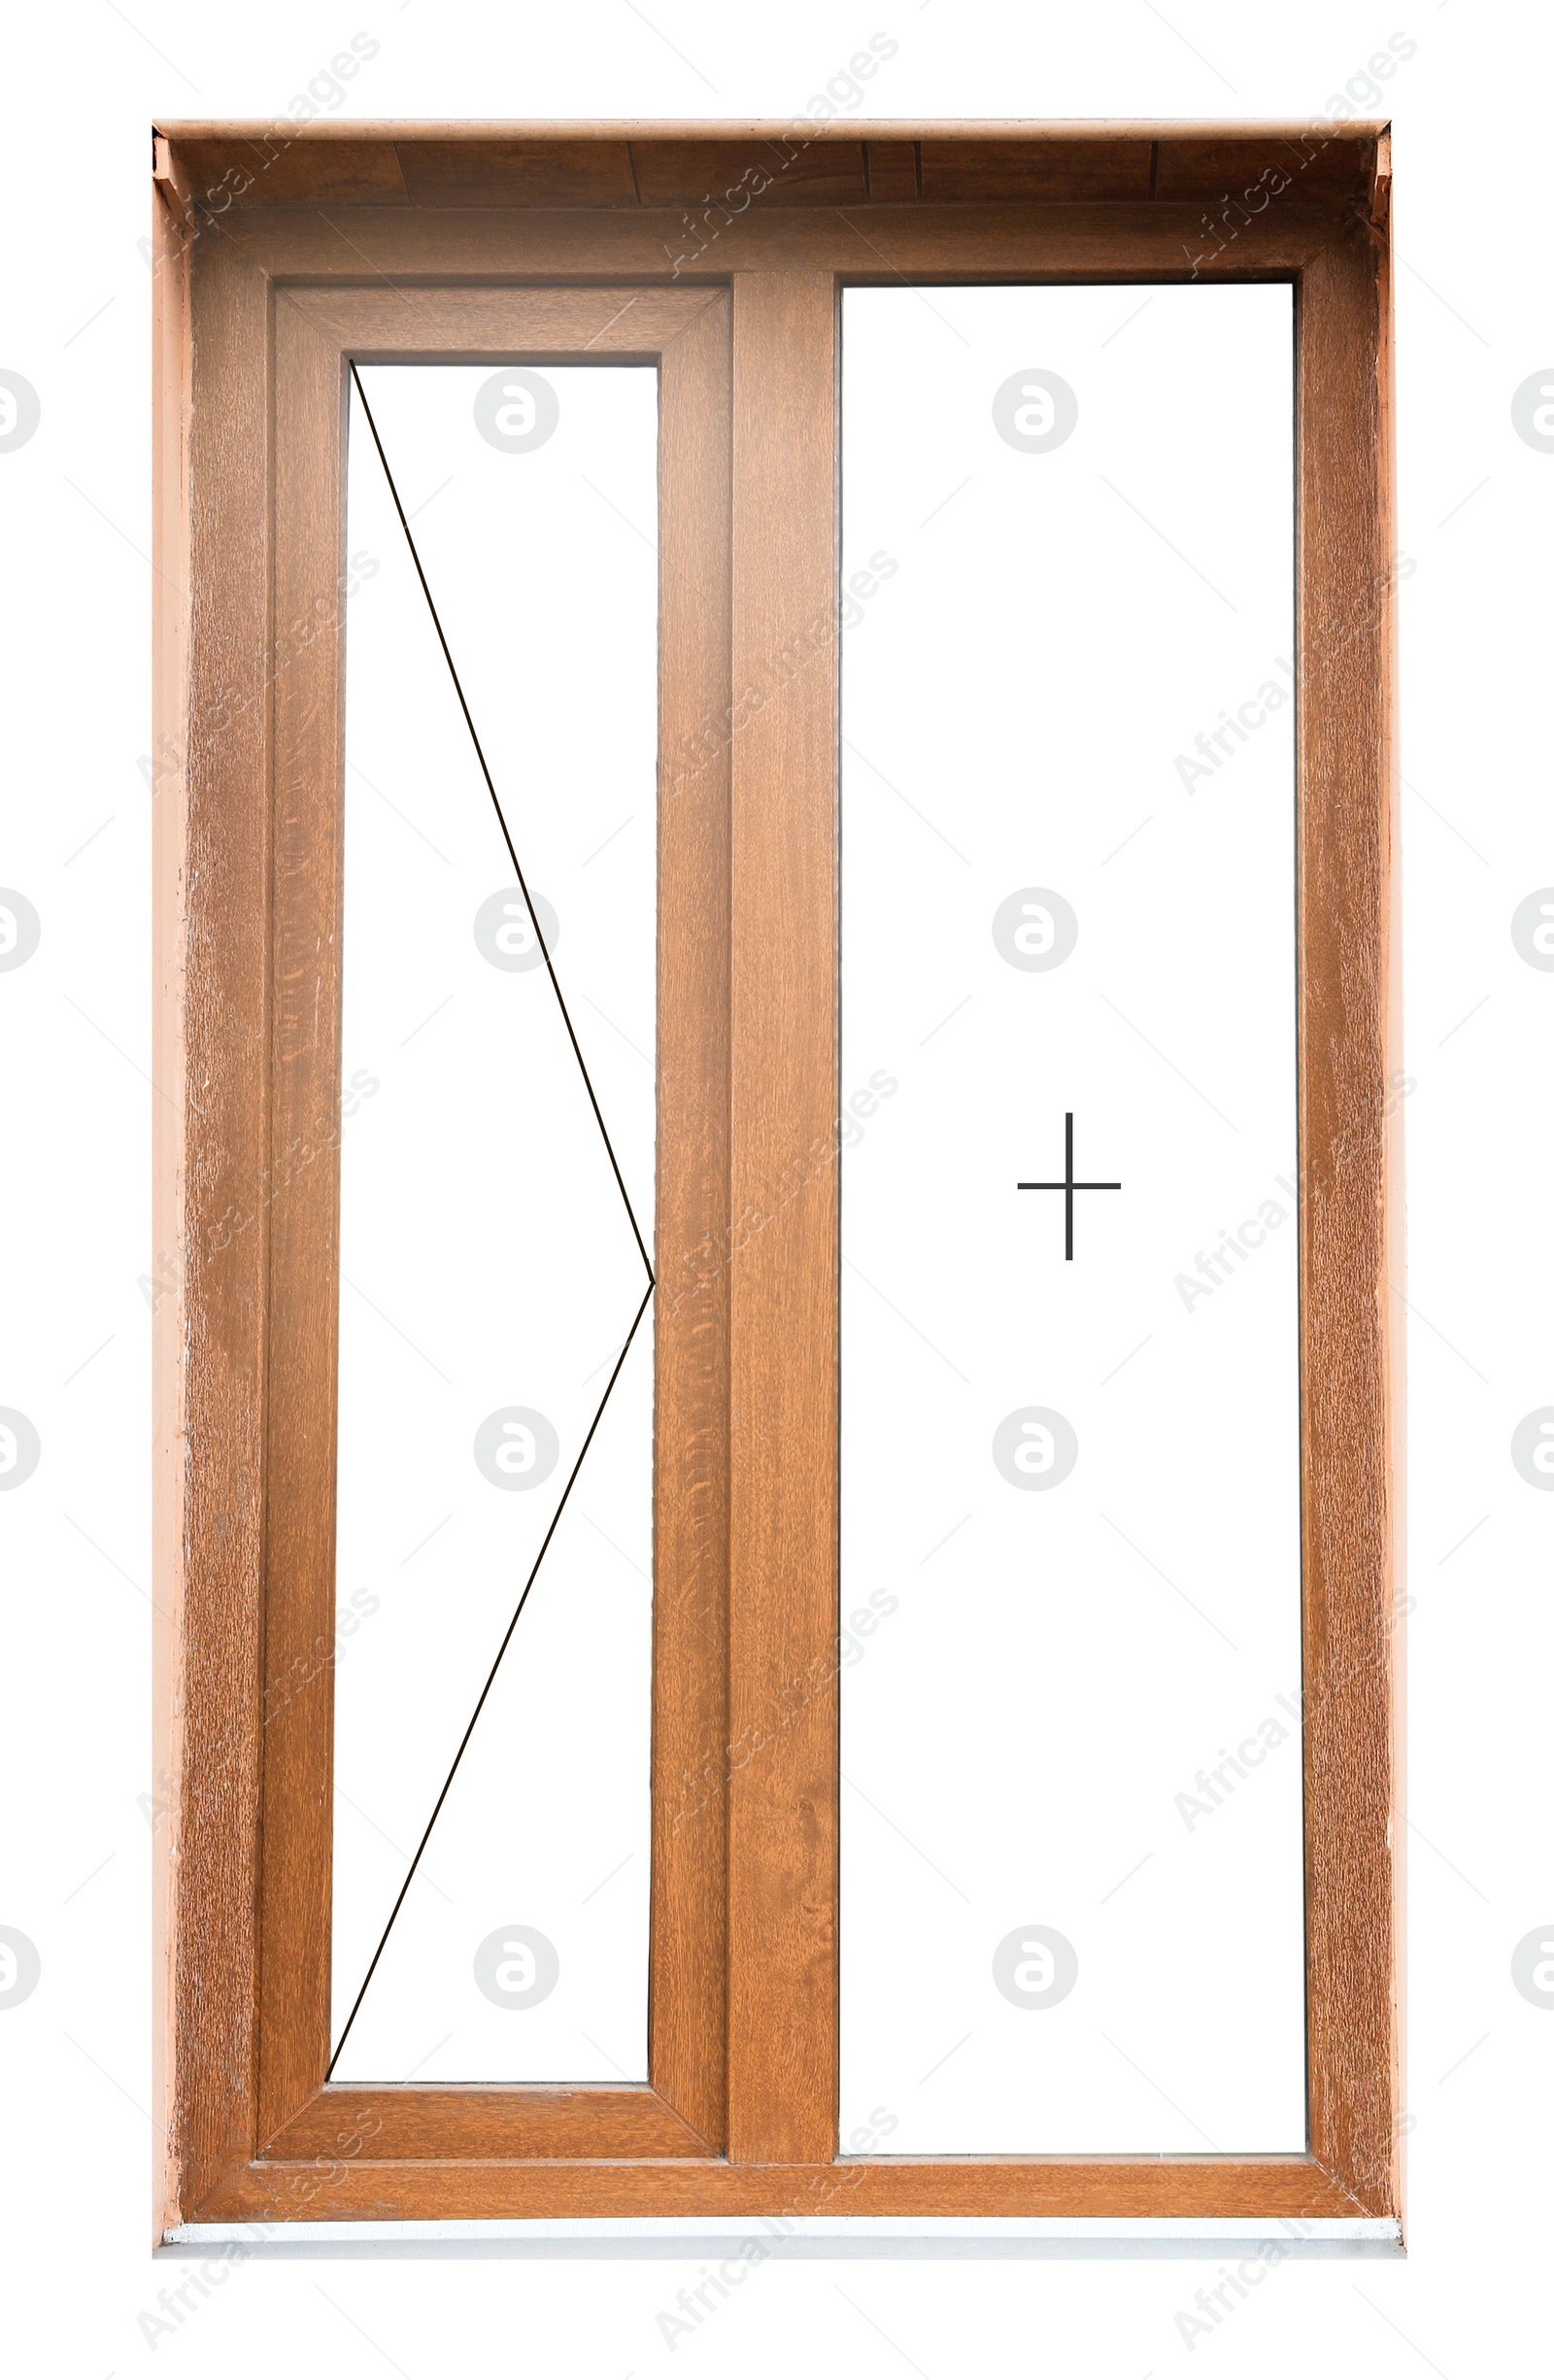 Image of Modern window with opening type lines on white background